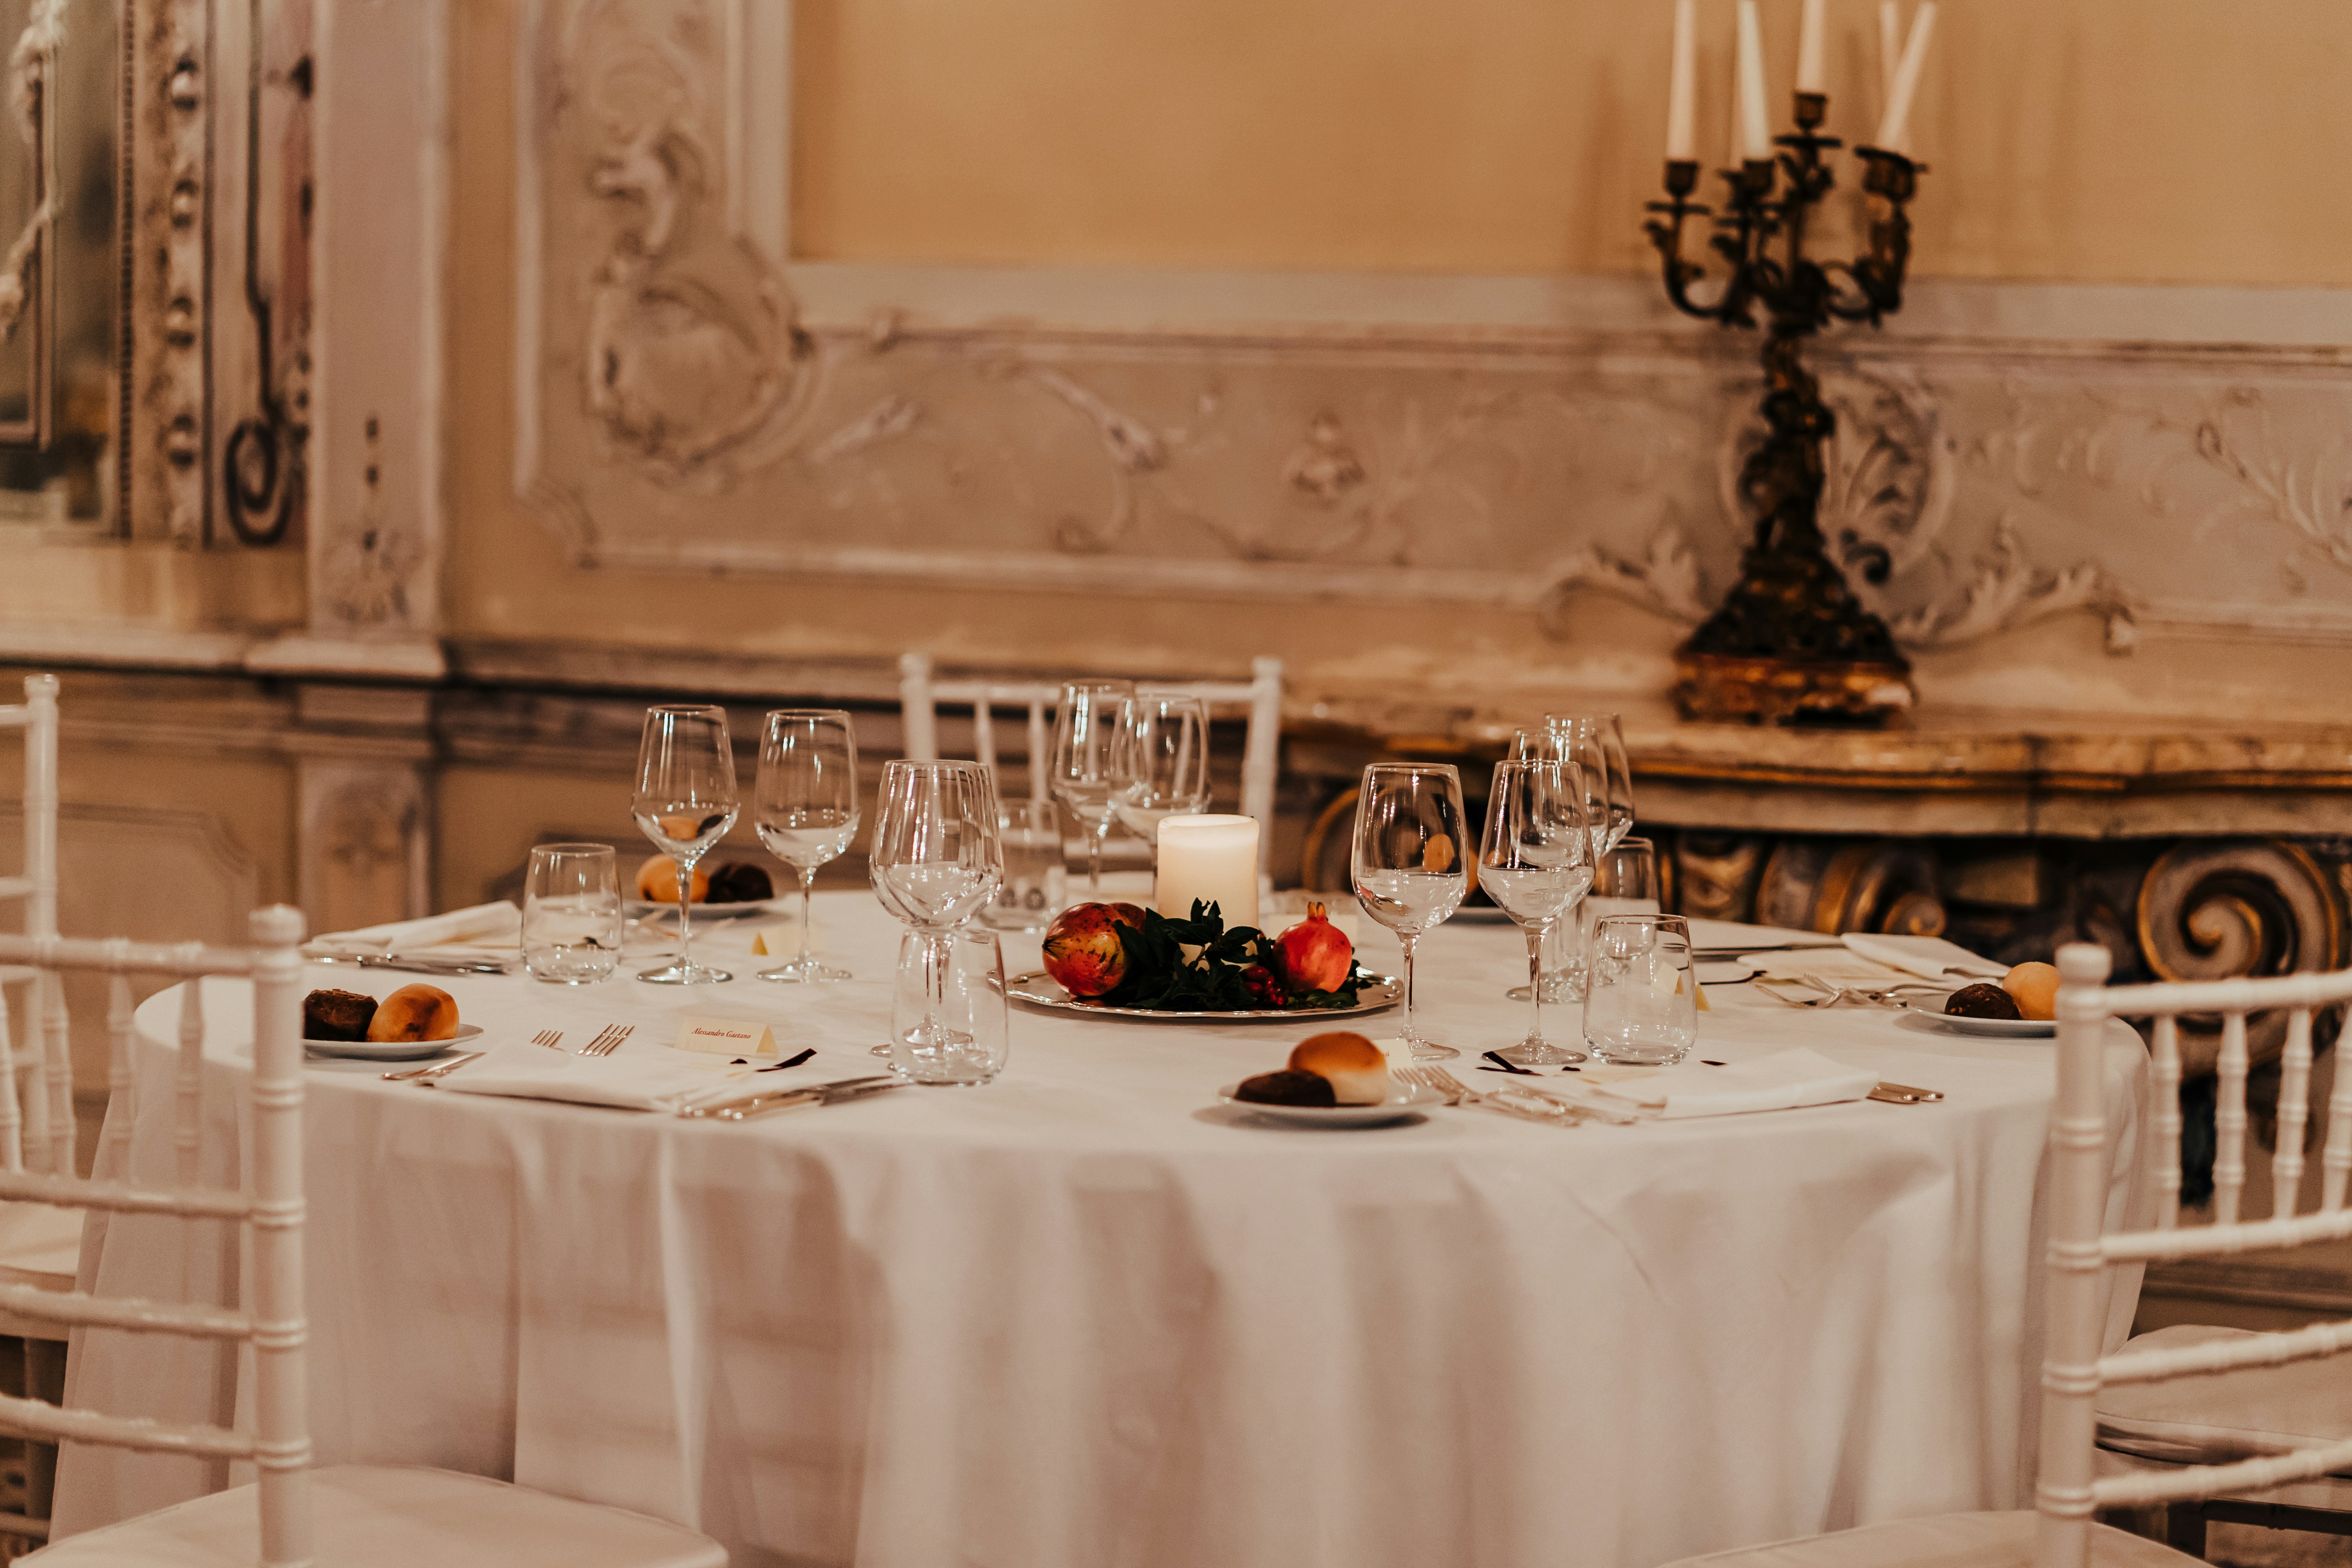 An exquisite example of a classic formal dinner layout in Italy